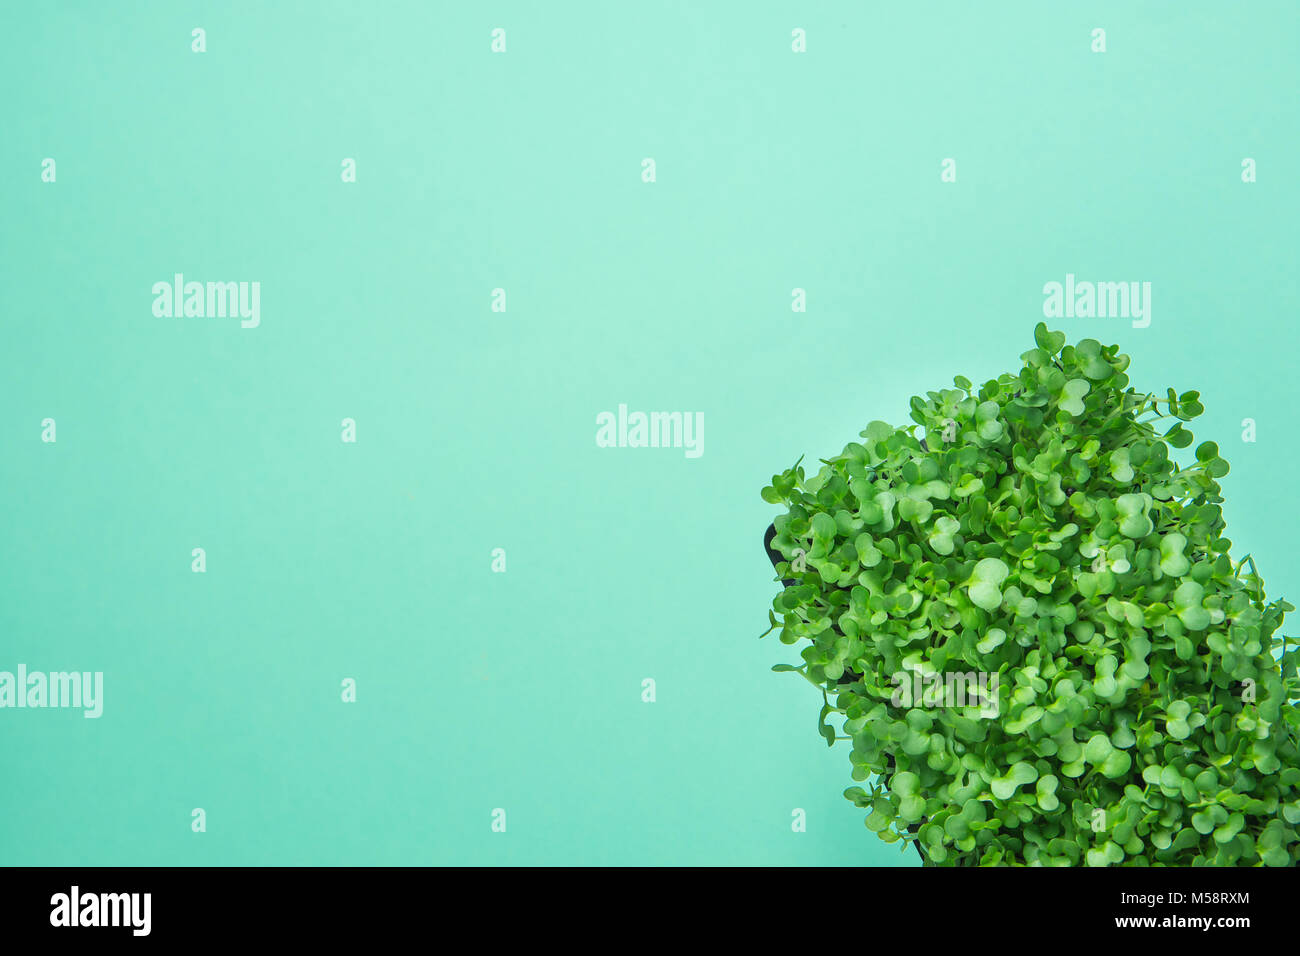 Young Fresh Green Sprouts of Potted Water Cress on Pastel Turquoise Background. Gardening Healthy Plant Based Diet Food Garnish Concept. Minimalist Tr Stock Photo